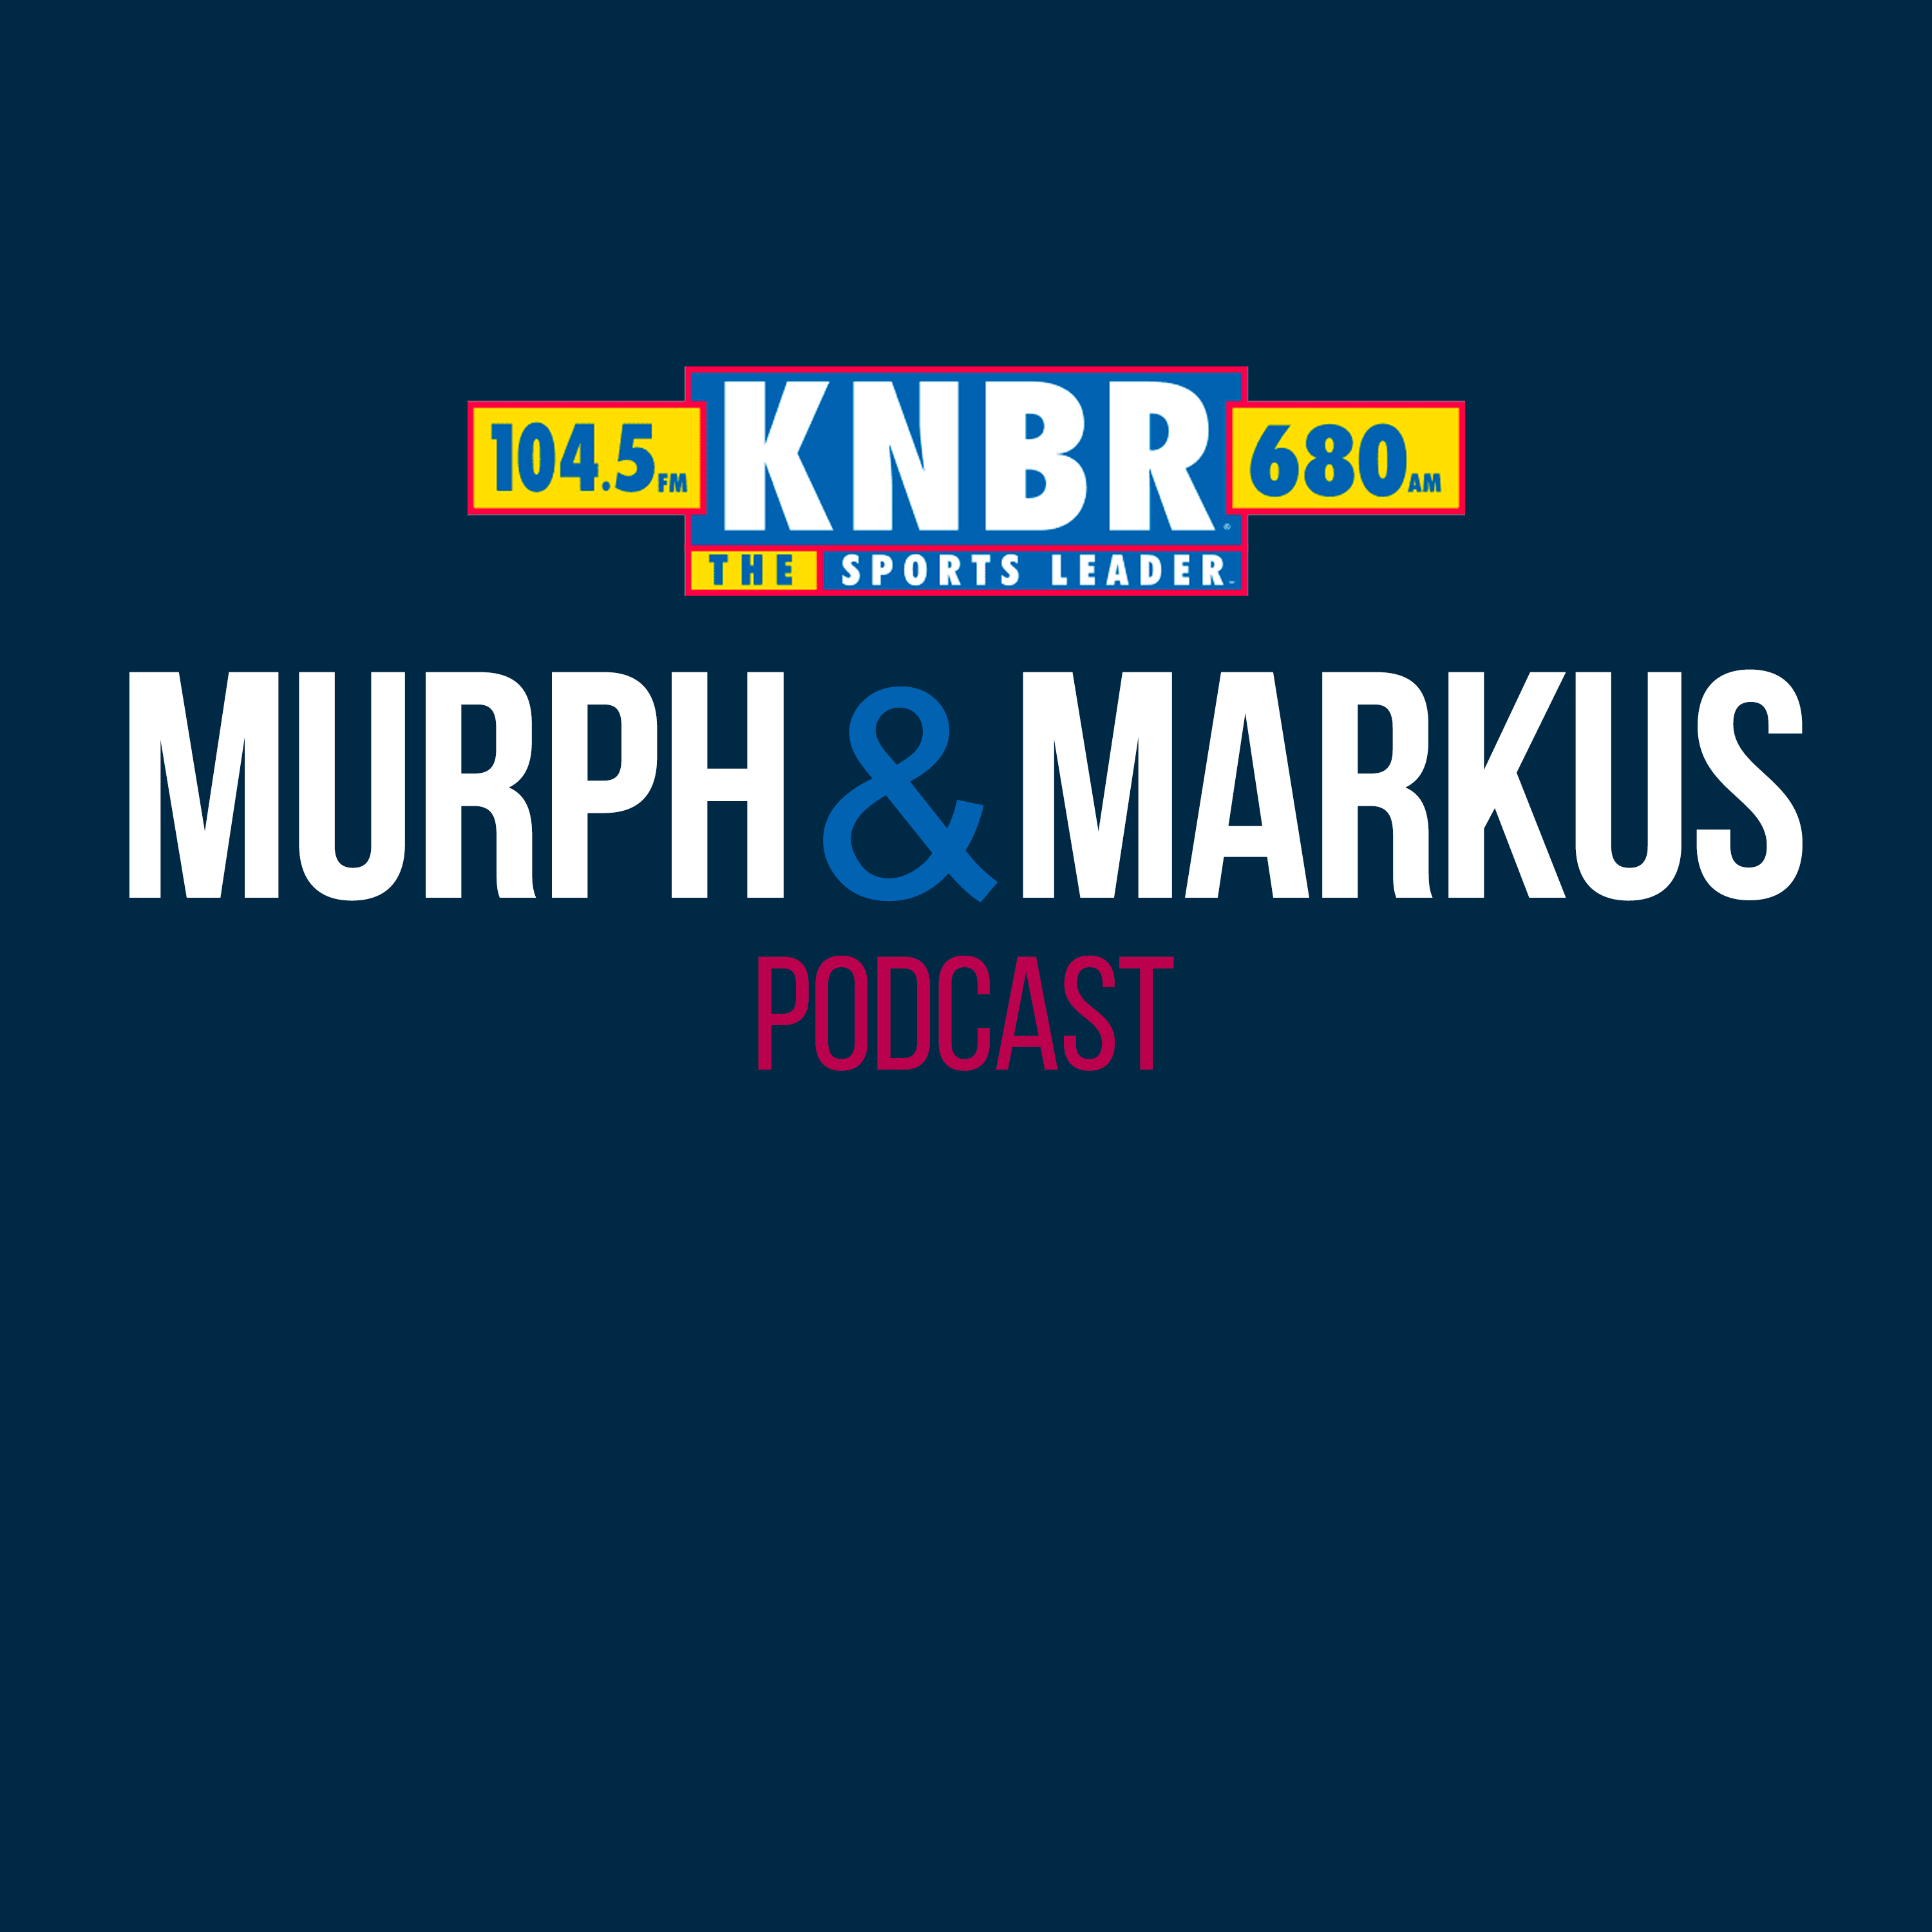 7-3 Hour 3: Murph & Markus dive into the Cooler of Content, discuss the fallout from Klay choosing to leave the Warriors, and talk to Matt Maiocco